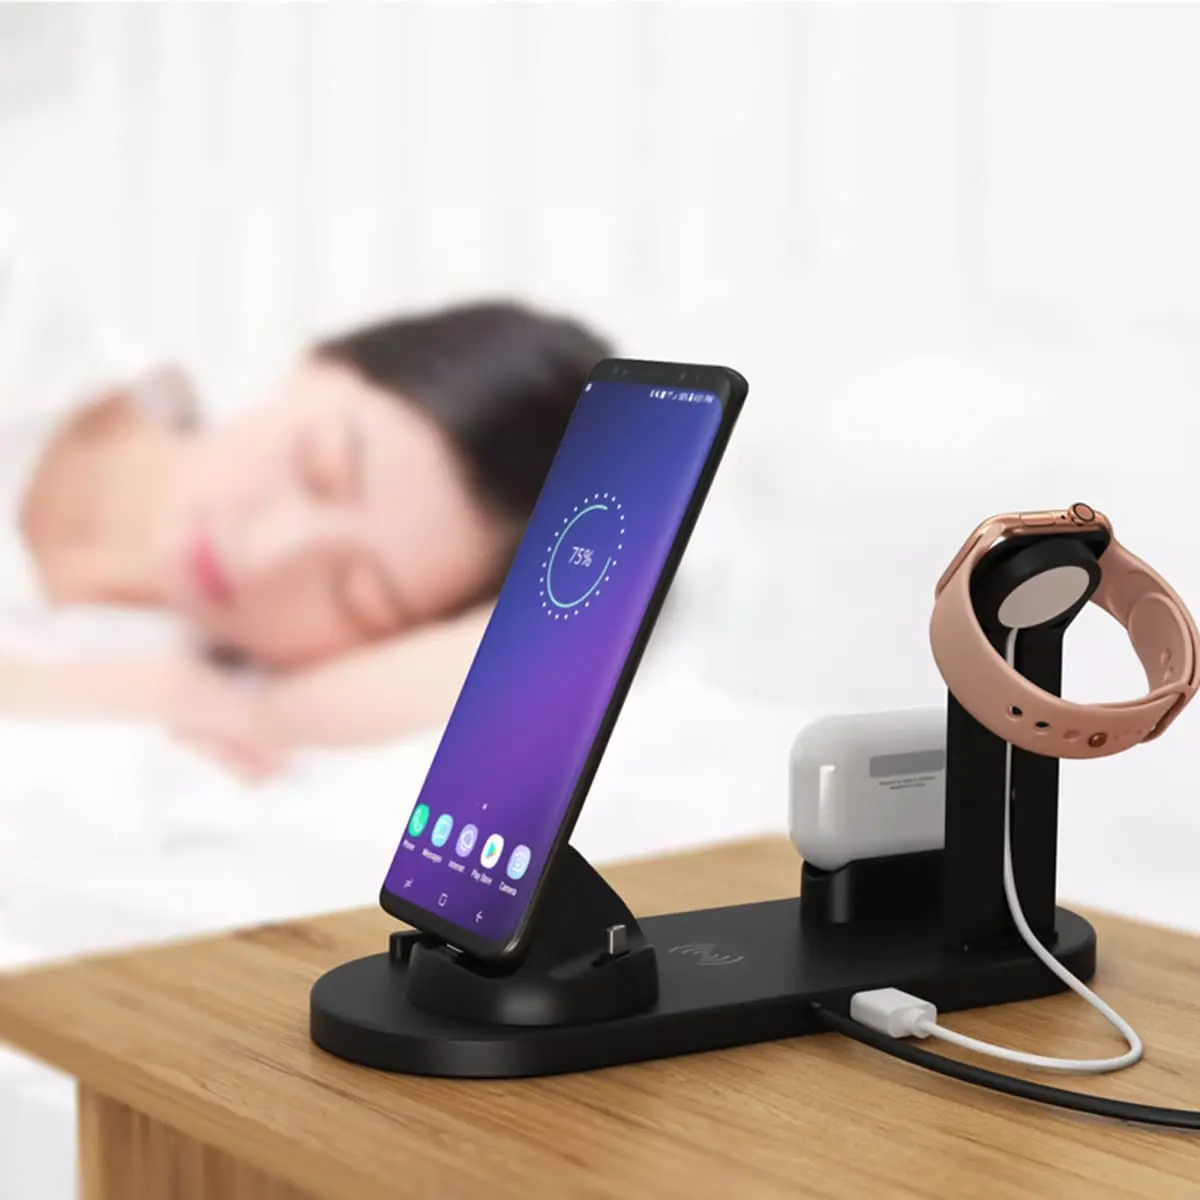 10W Wireless Charge OEM Factory Wholesale Pricing Smart Phone Qi Fast Charging Station 5 In 1 Wireless Charging Dock